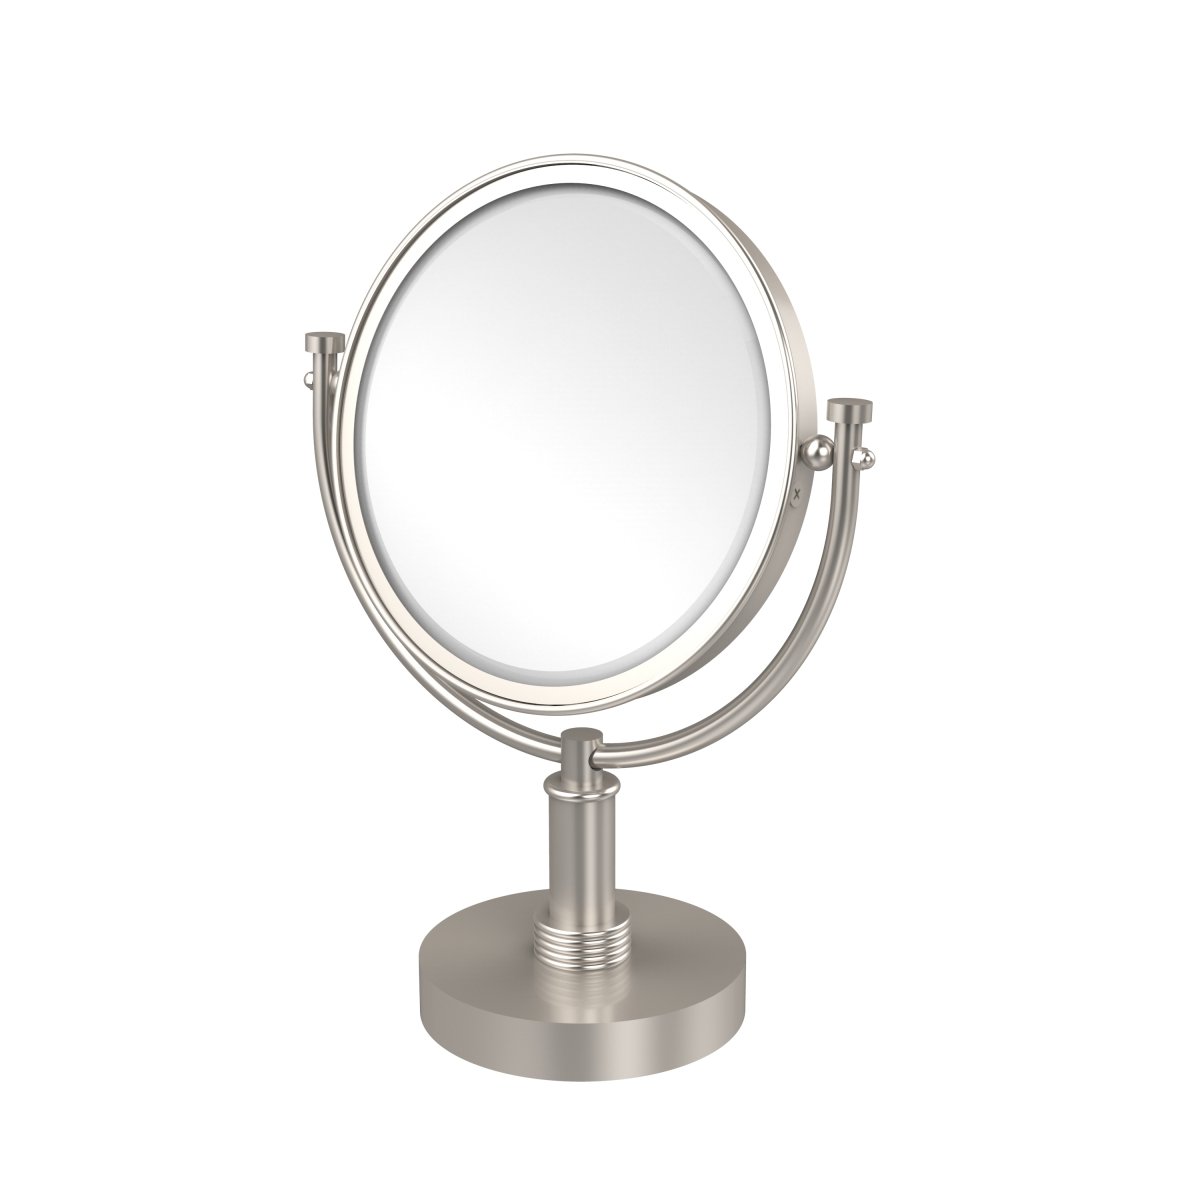 Picture of Allied Brass DM-4G-2X-SN 8 in. Vanity Top Make-Up Mirror 2X Magnification, Satin Nickel - 15 x 8 x 8 in.